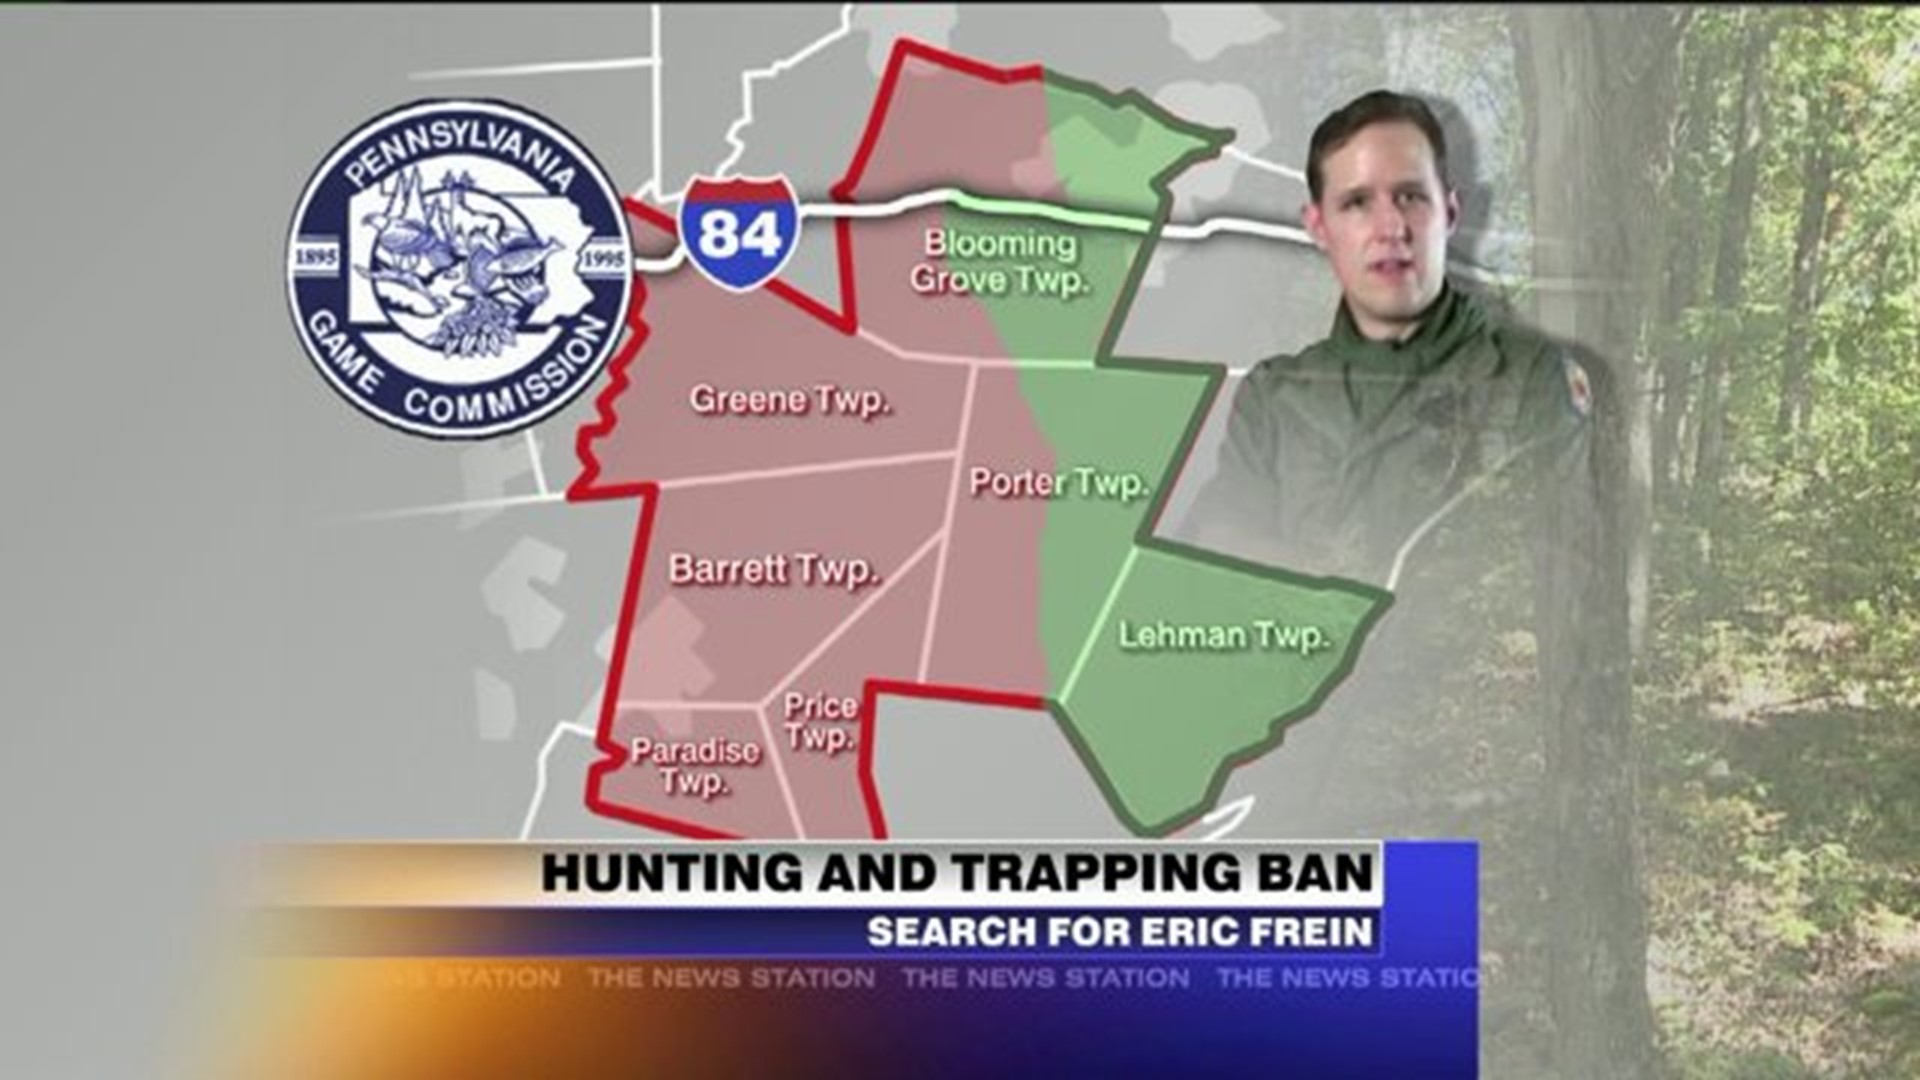 Hunting Restrictions Lifted In Part Of Search Area